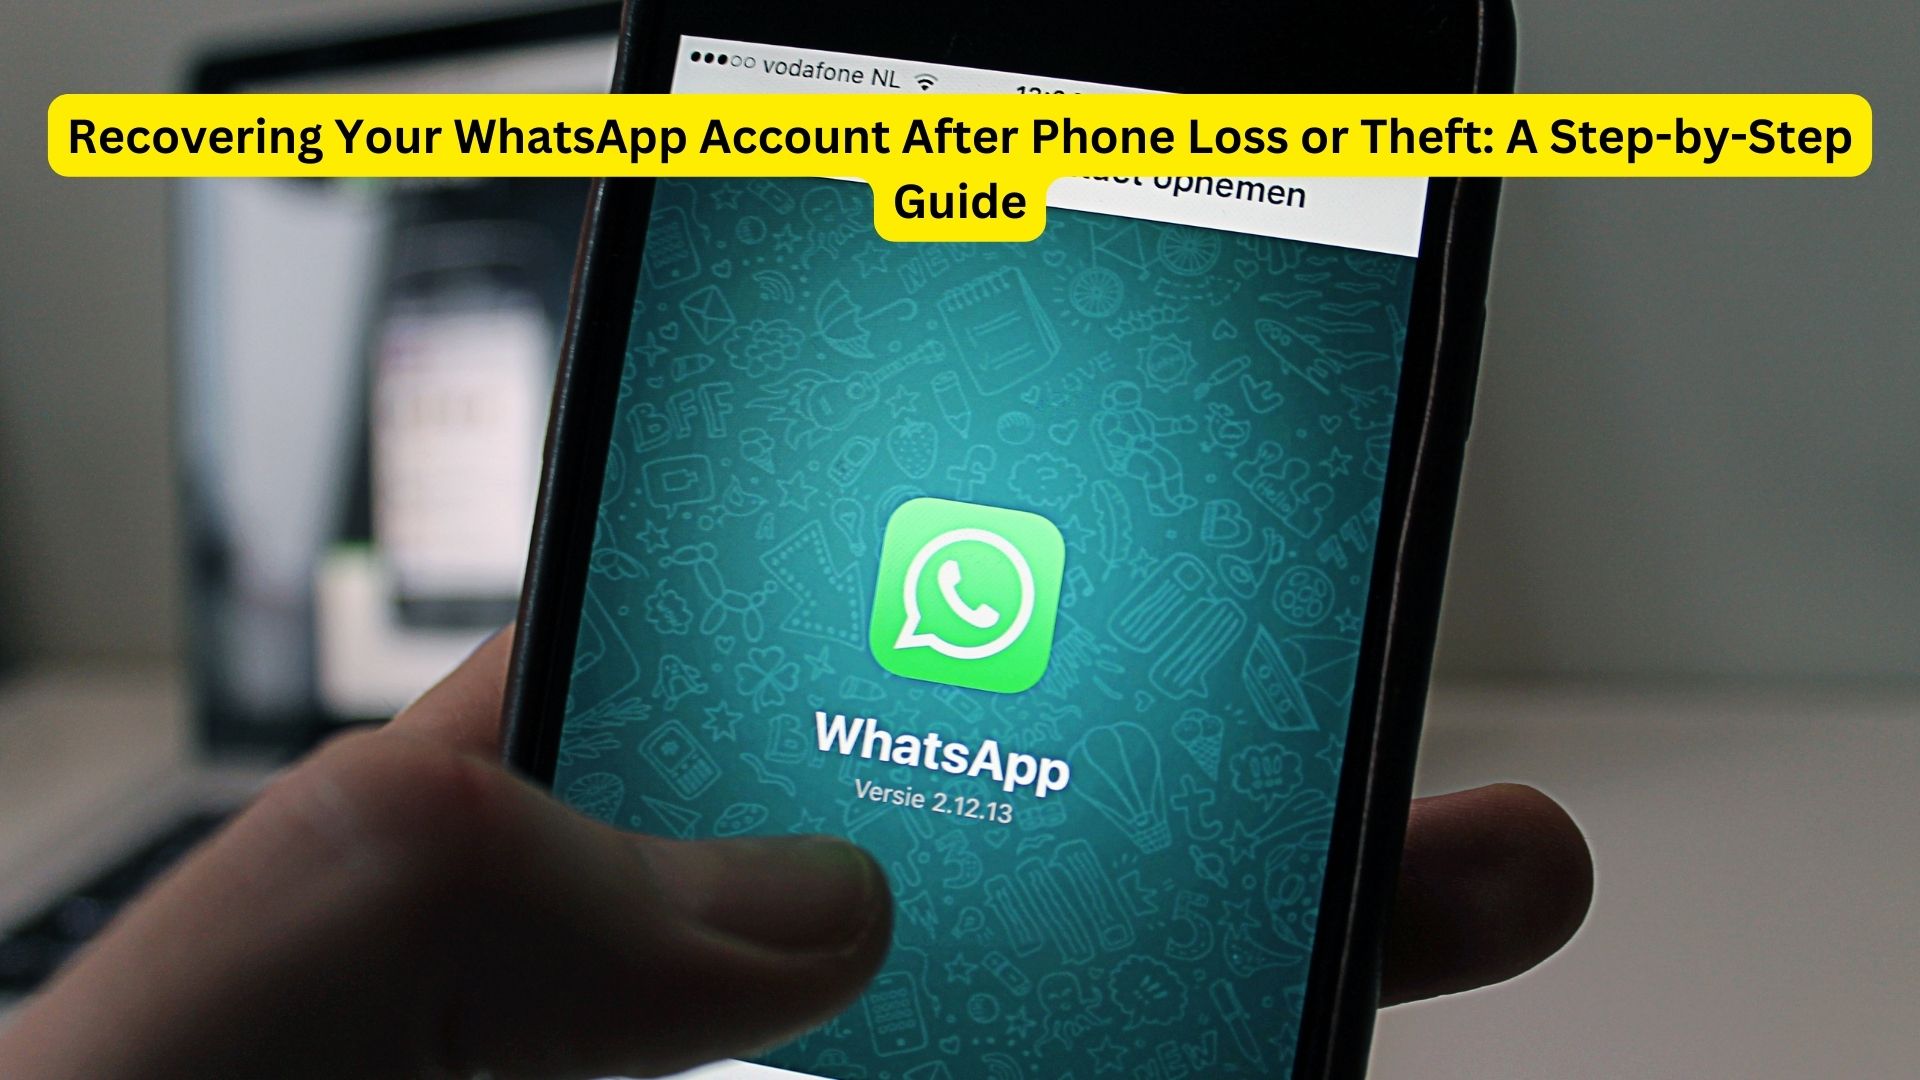 Recovering Your WhatsApp Account After Phone Loss or Theft: A Step-by-Step Guide